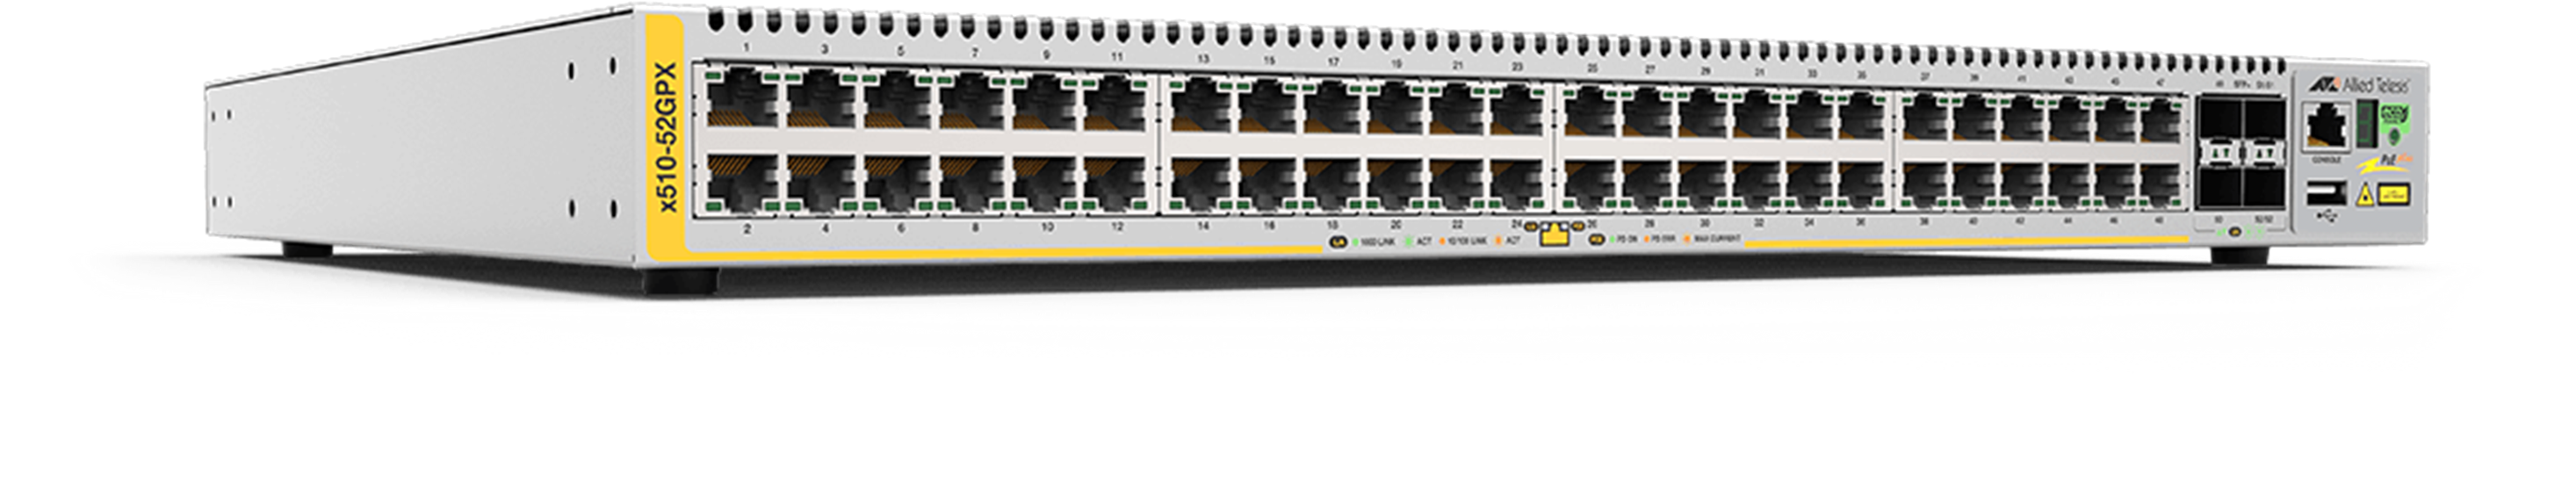 AT-x510 series - Advanced Gigabit Layer 3 Stackable Switch